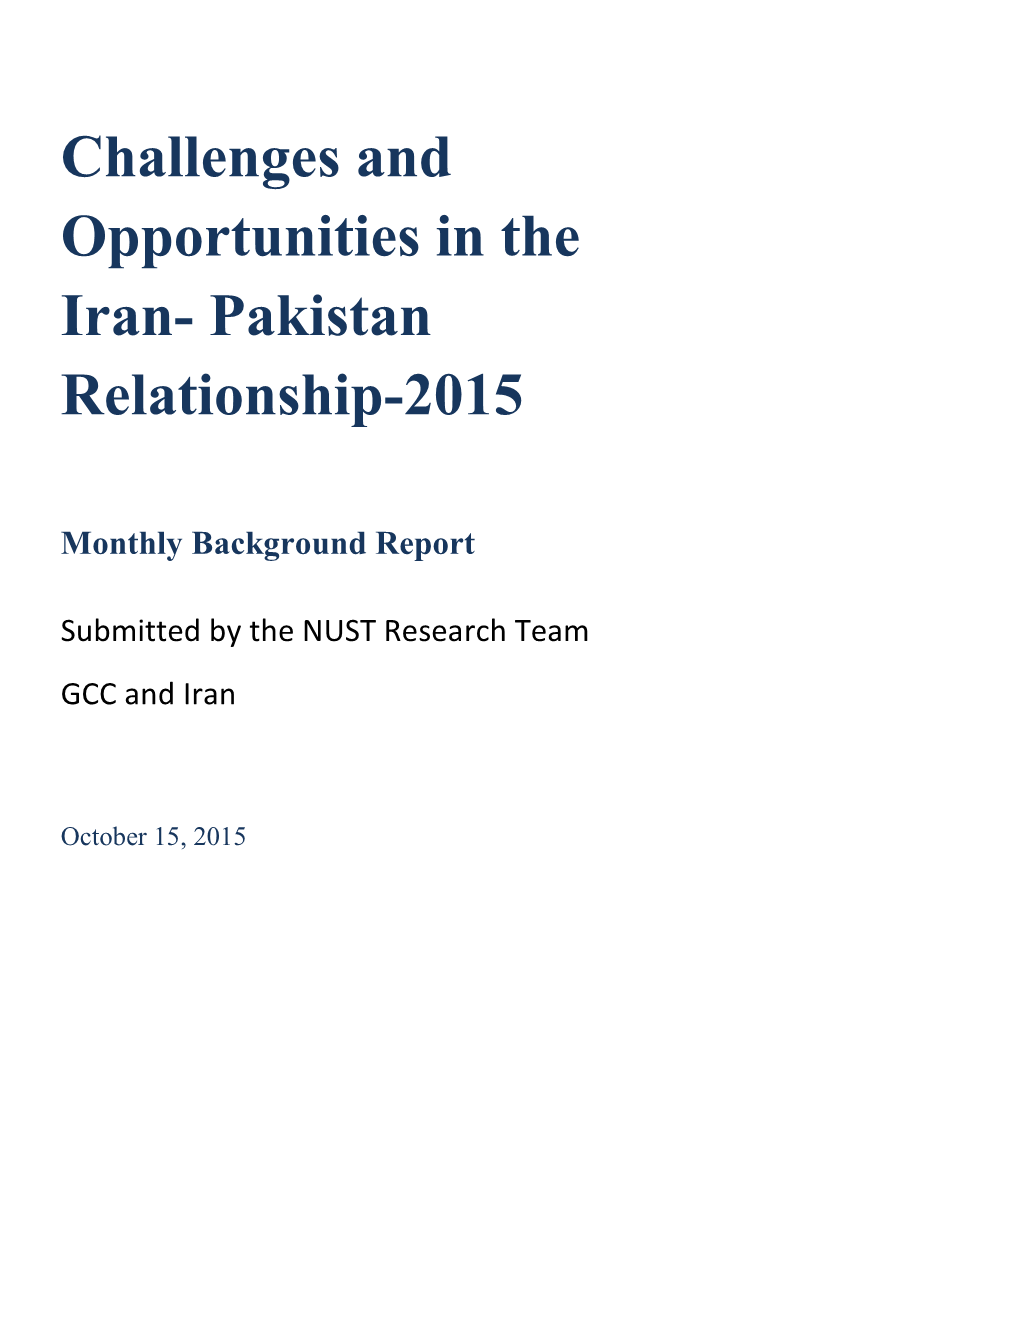 Challenges and Opportunities in the Iran- Pakistan Relationship-2015